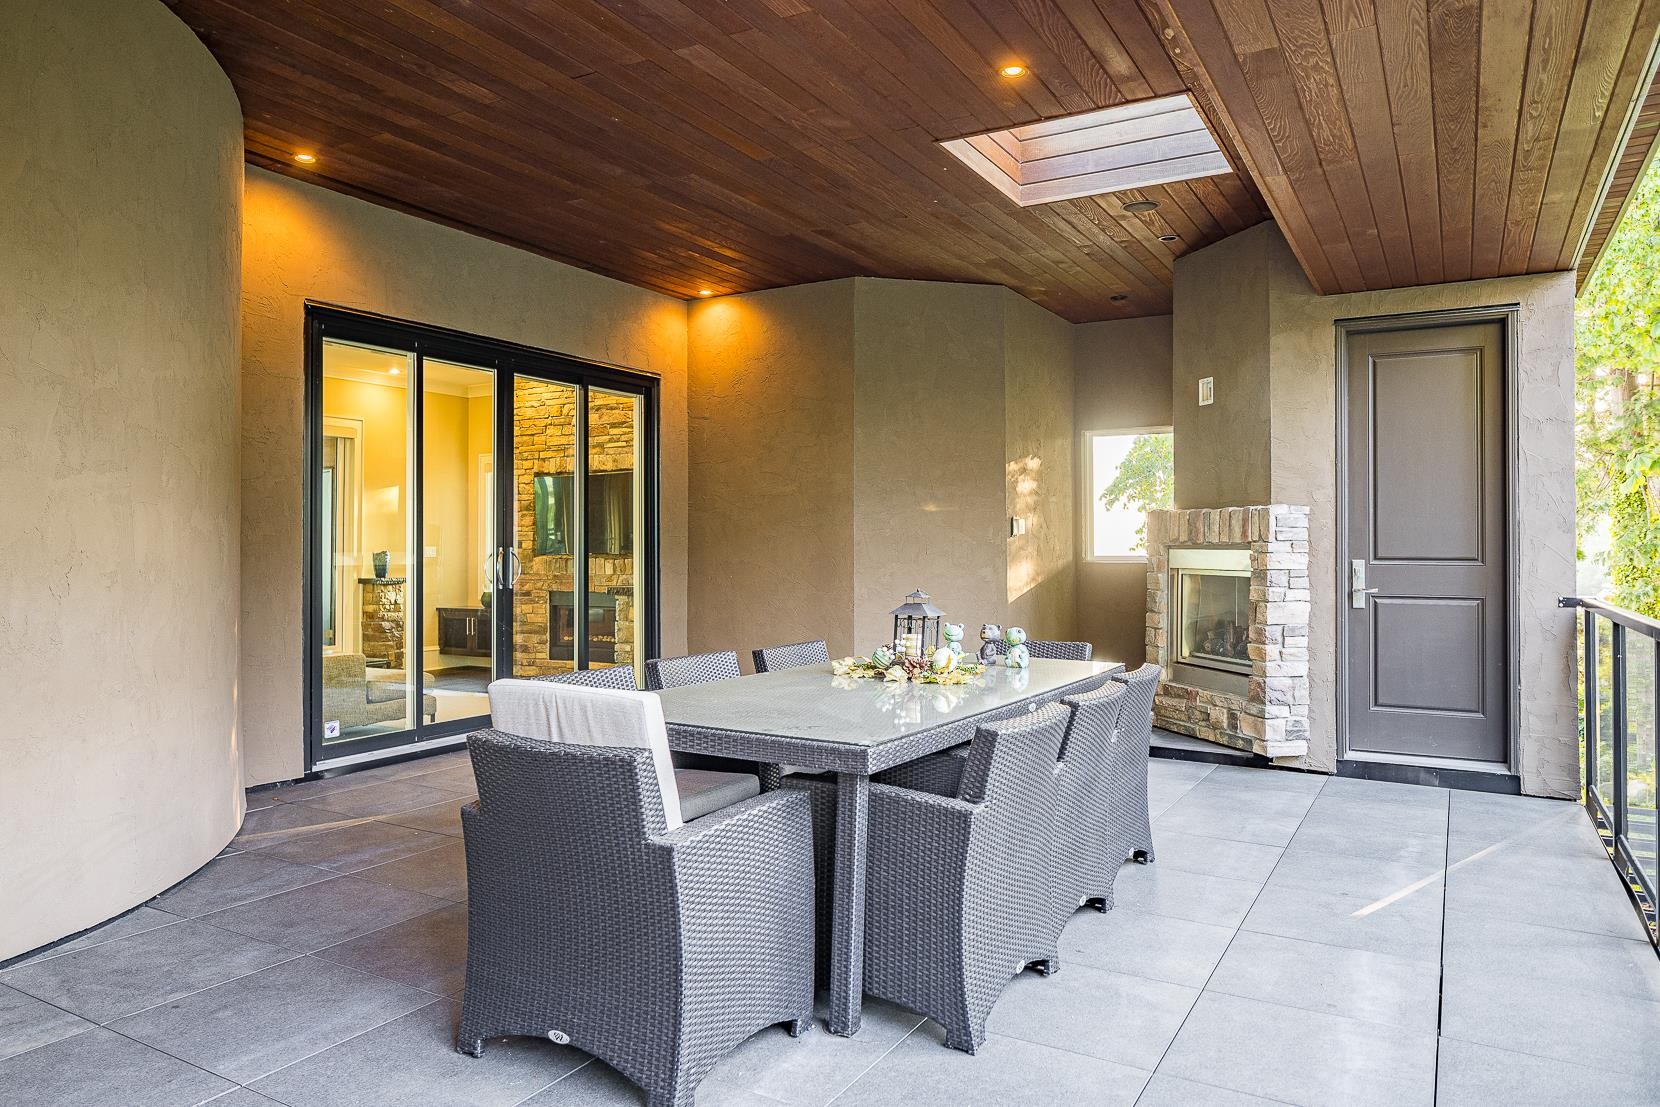 Embrace the joy of outdoor entertaining with a dedicated patio/BBQ area, perfect for hosting gatherings